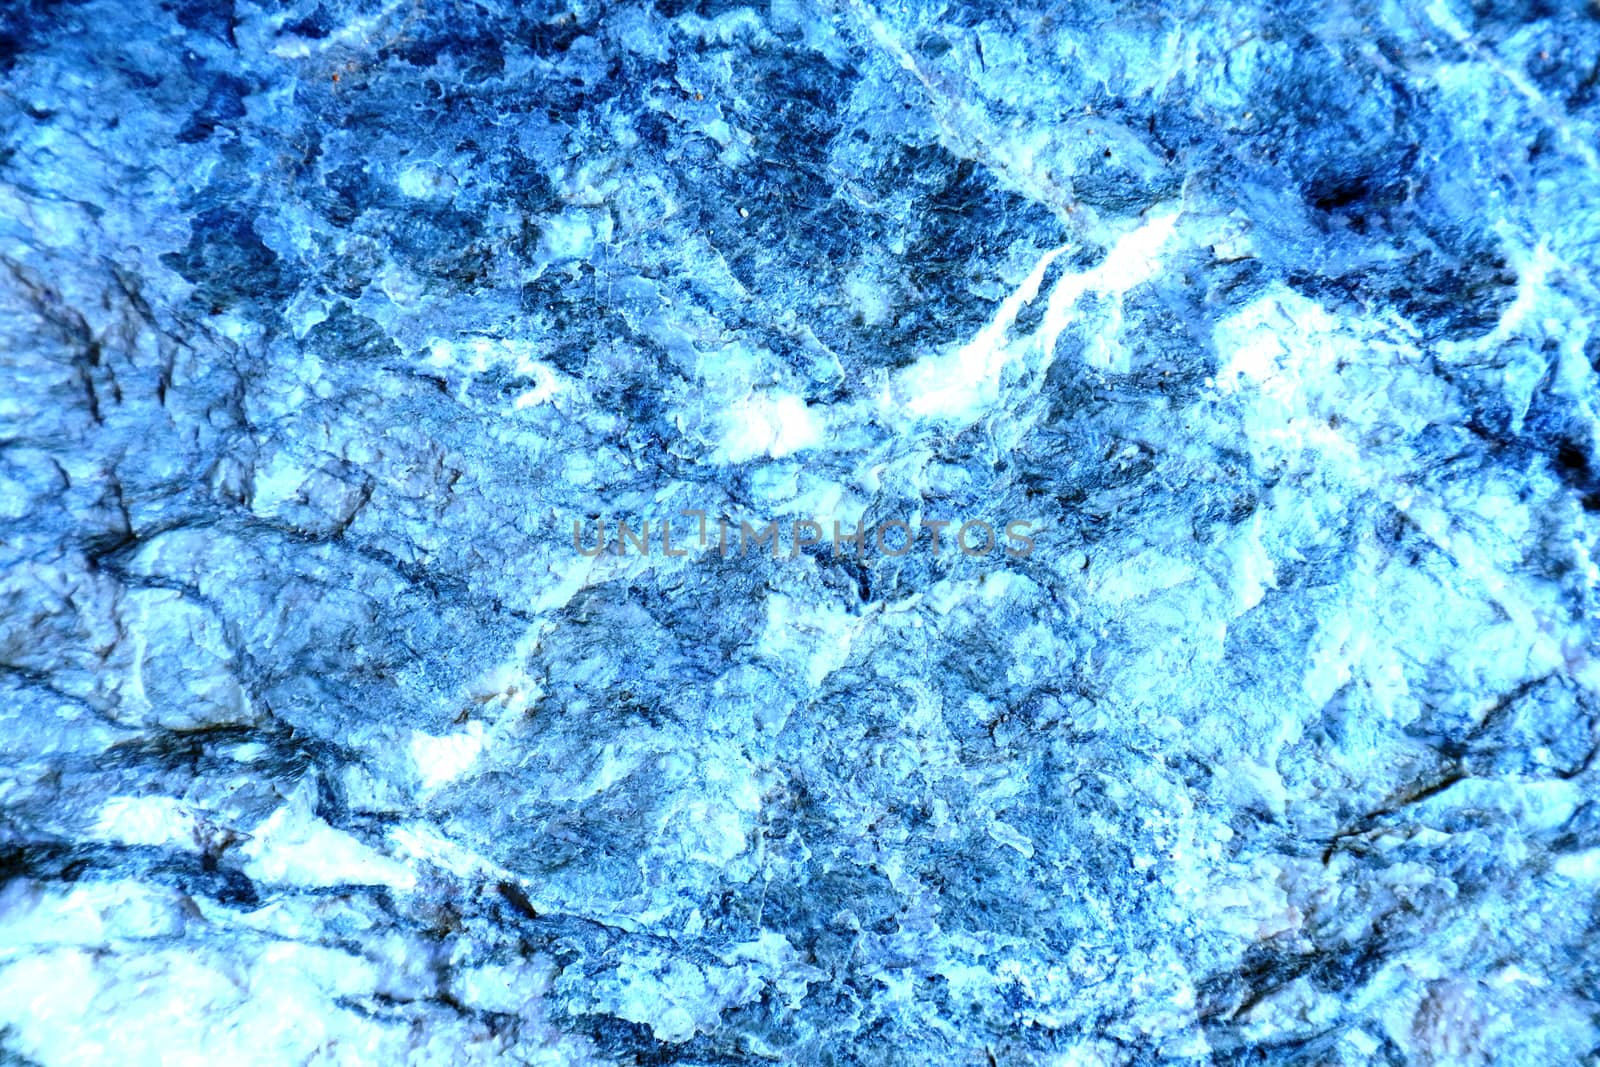 ancient ice frost color granite stone surface of cave for interior wallpaper and background